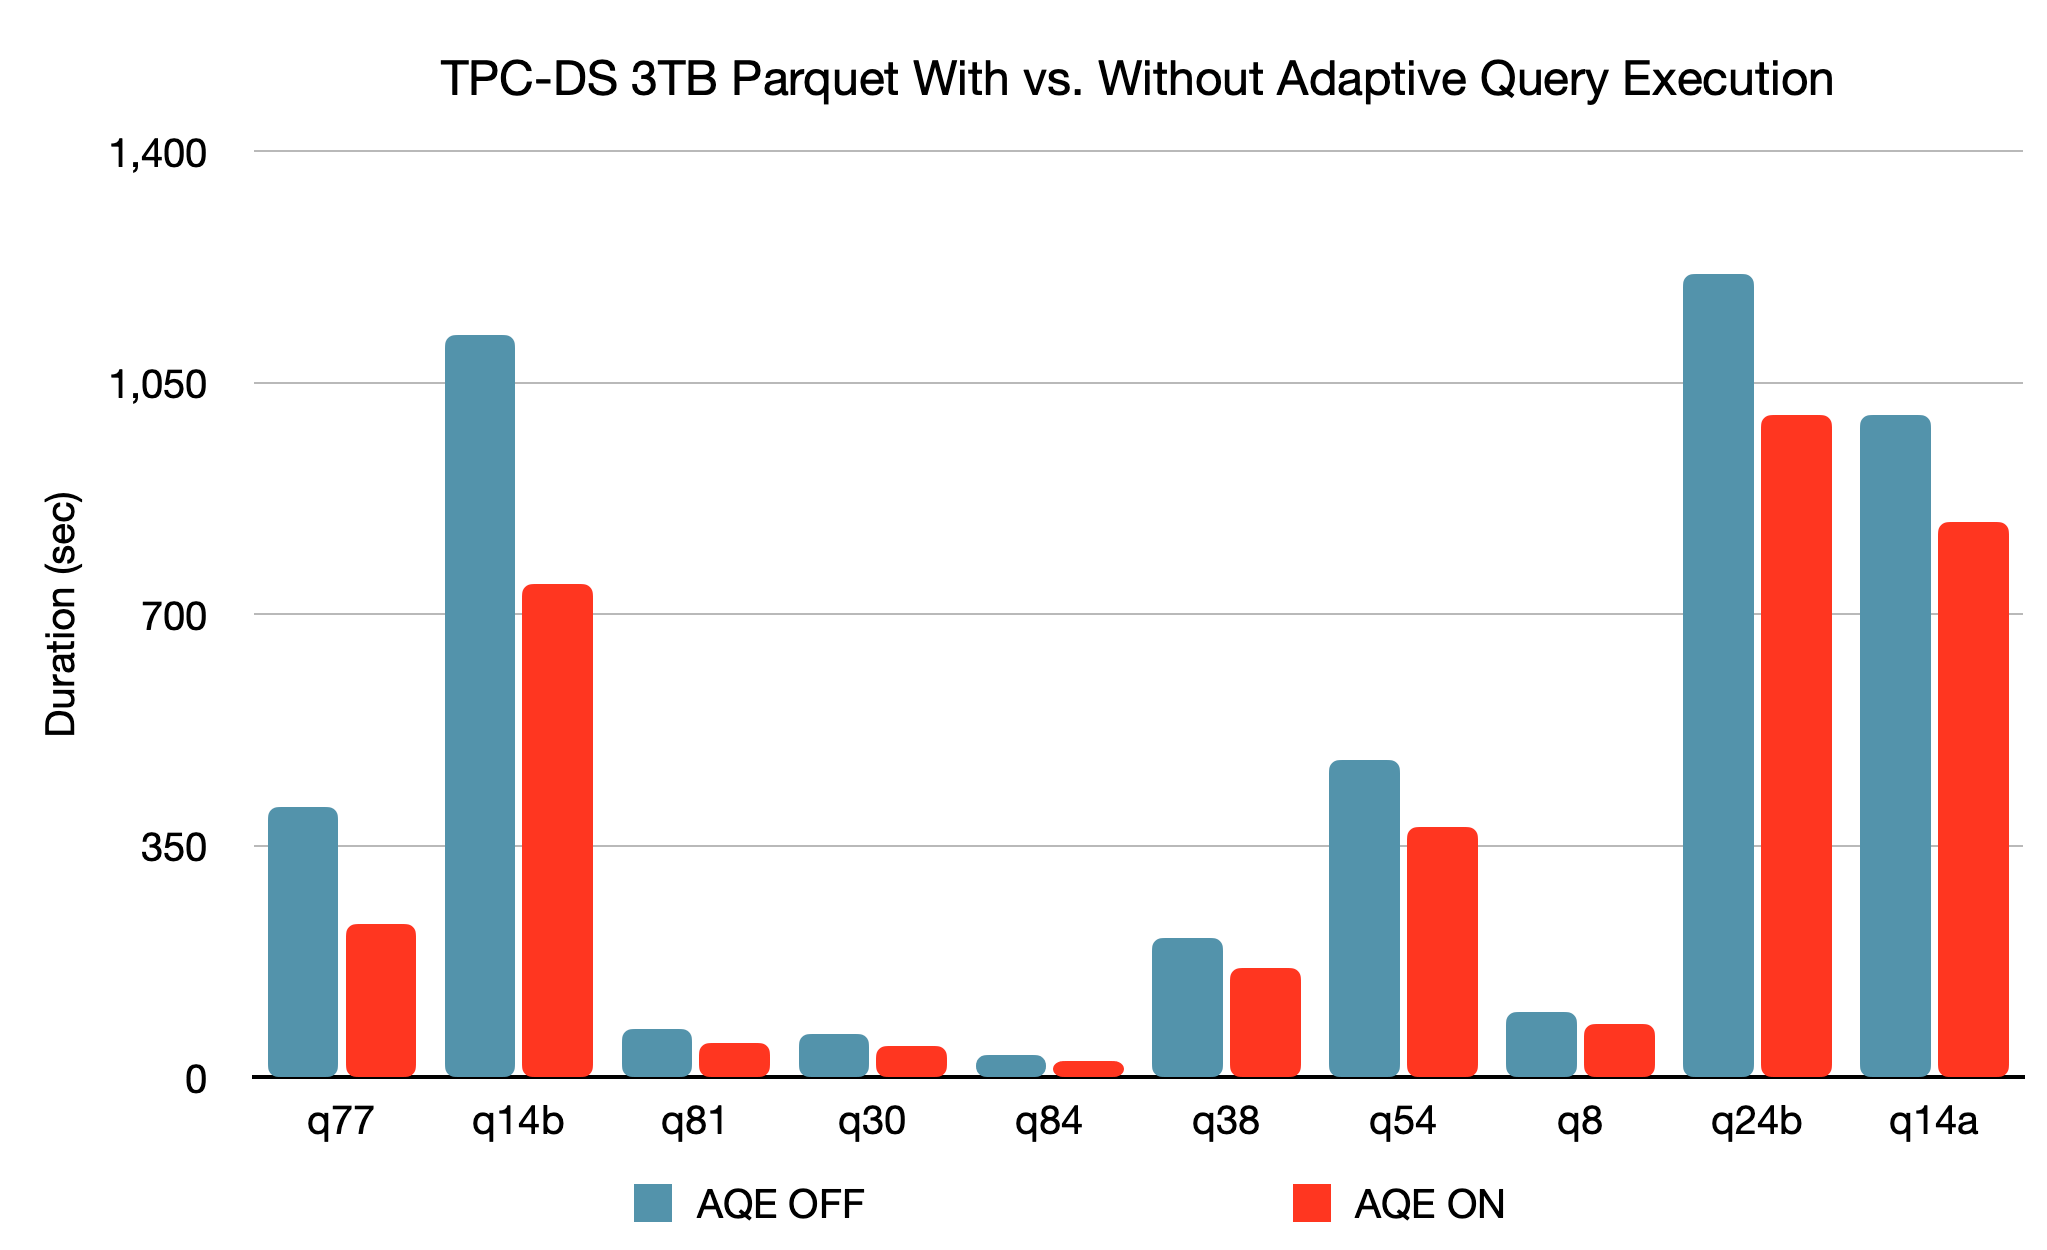 TPC-DS 3TB Parquet With vs. Without Adaptive Query Execution.